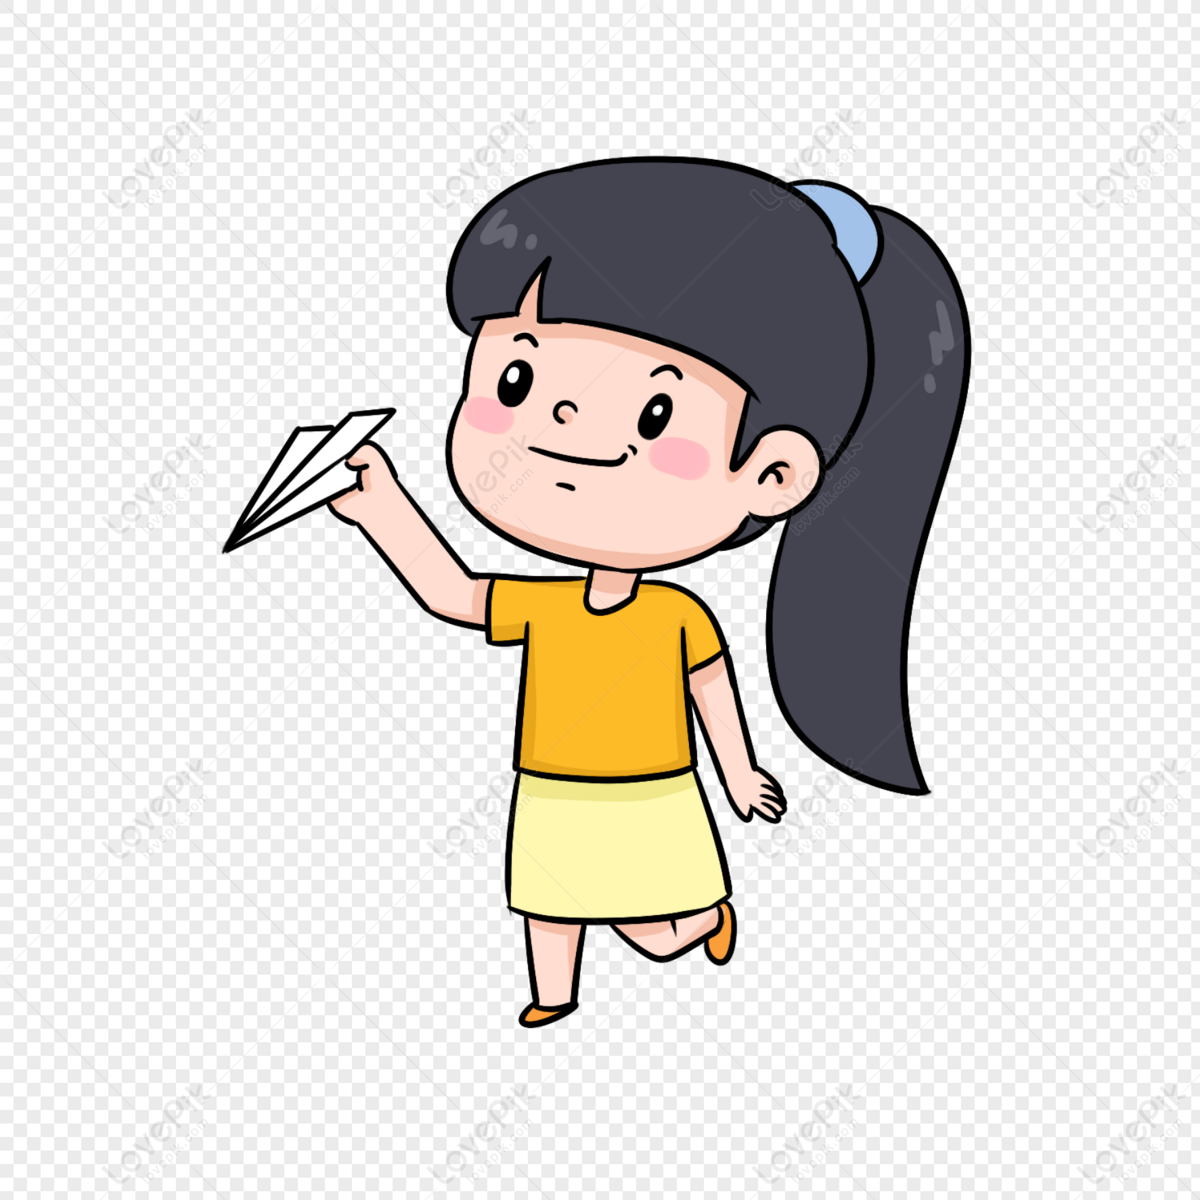 Cartoon Yellow Dress Girl Flying Paper Plane PNG Image Free Download And  Clipart Image For Free Download - Lovepik | 401358761